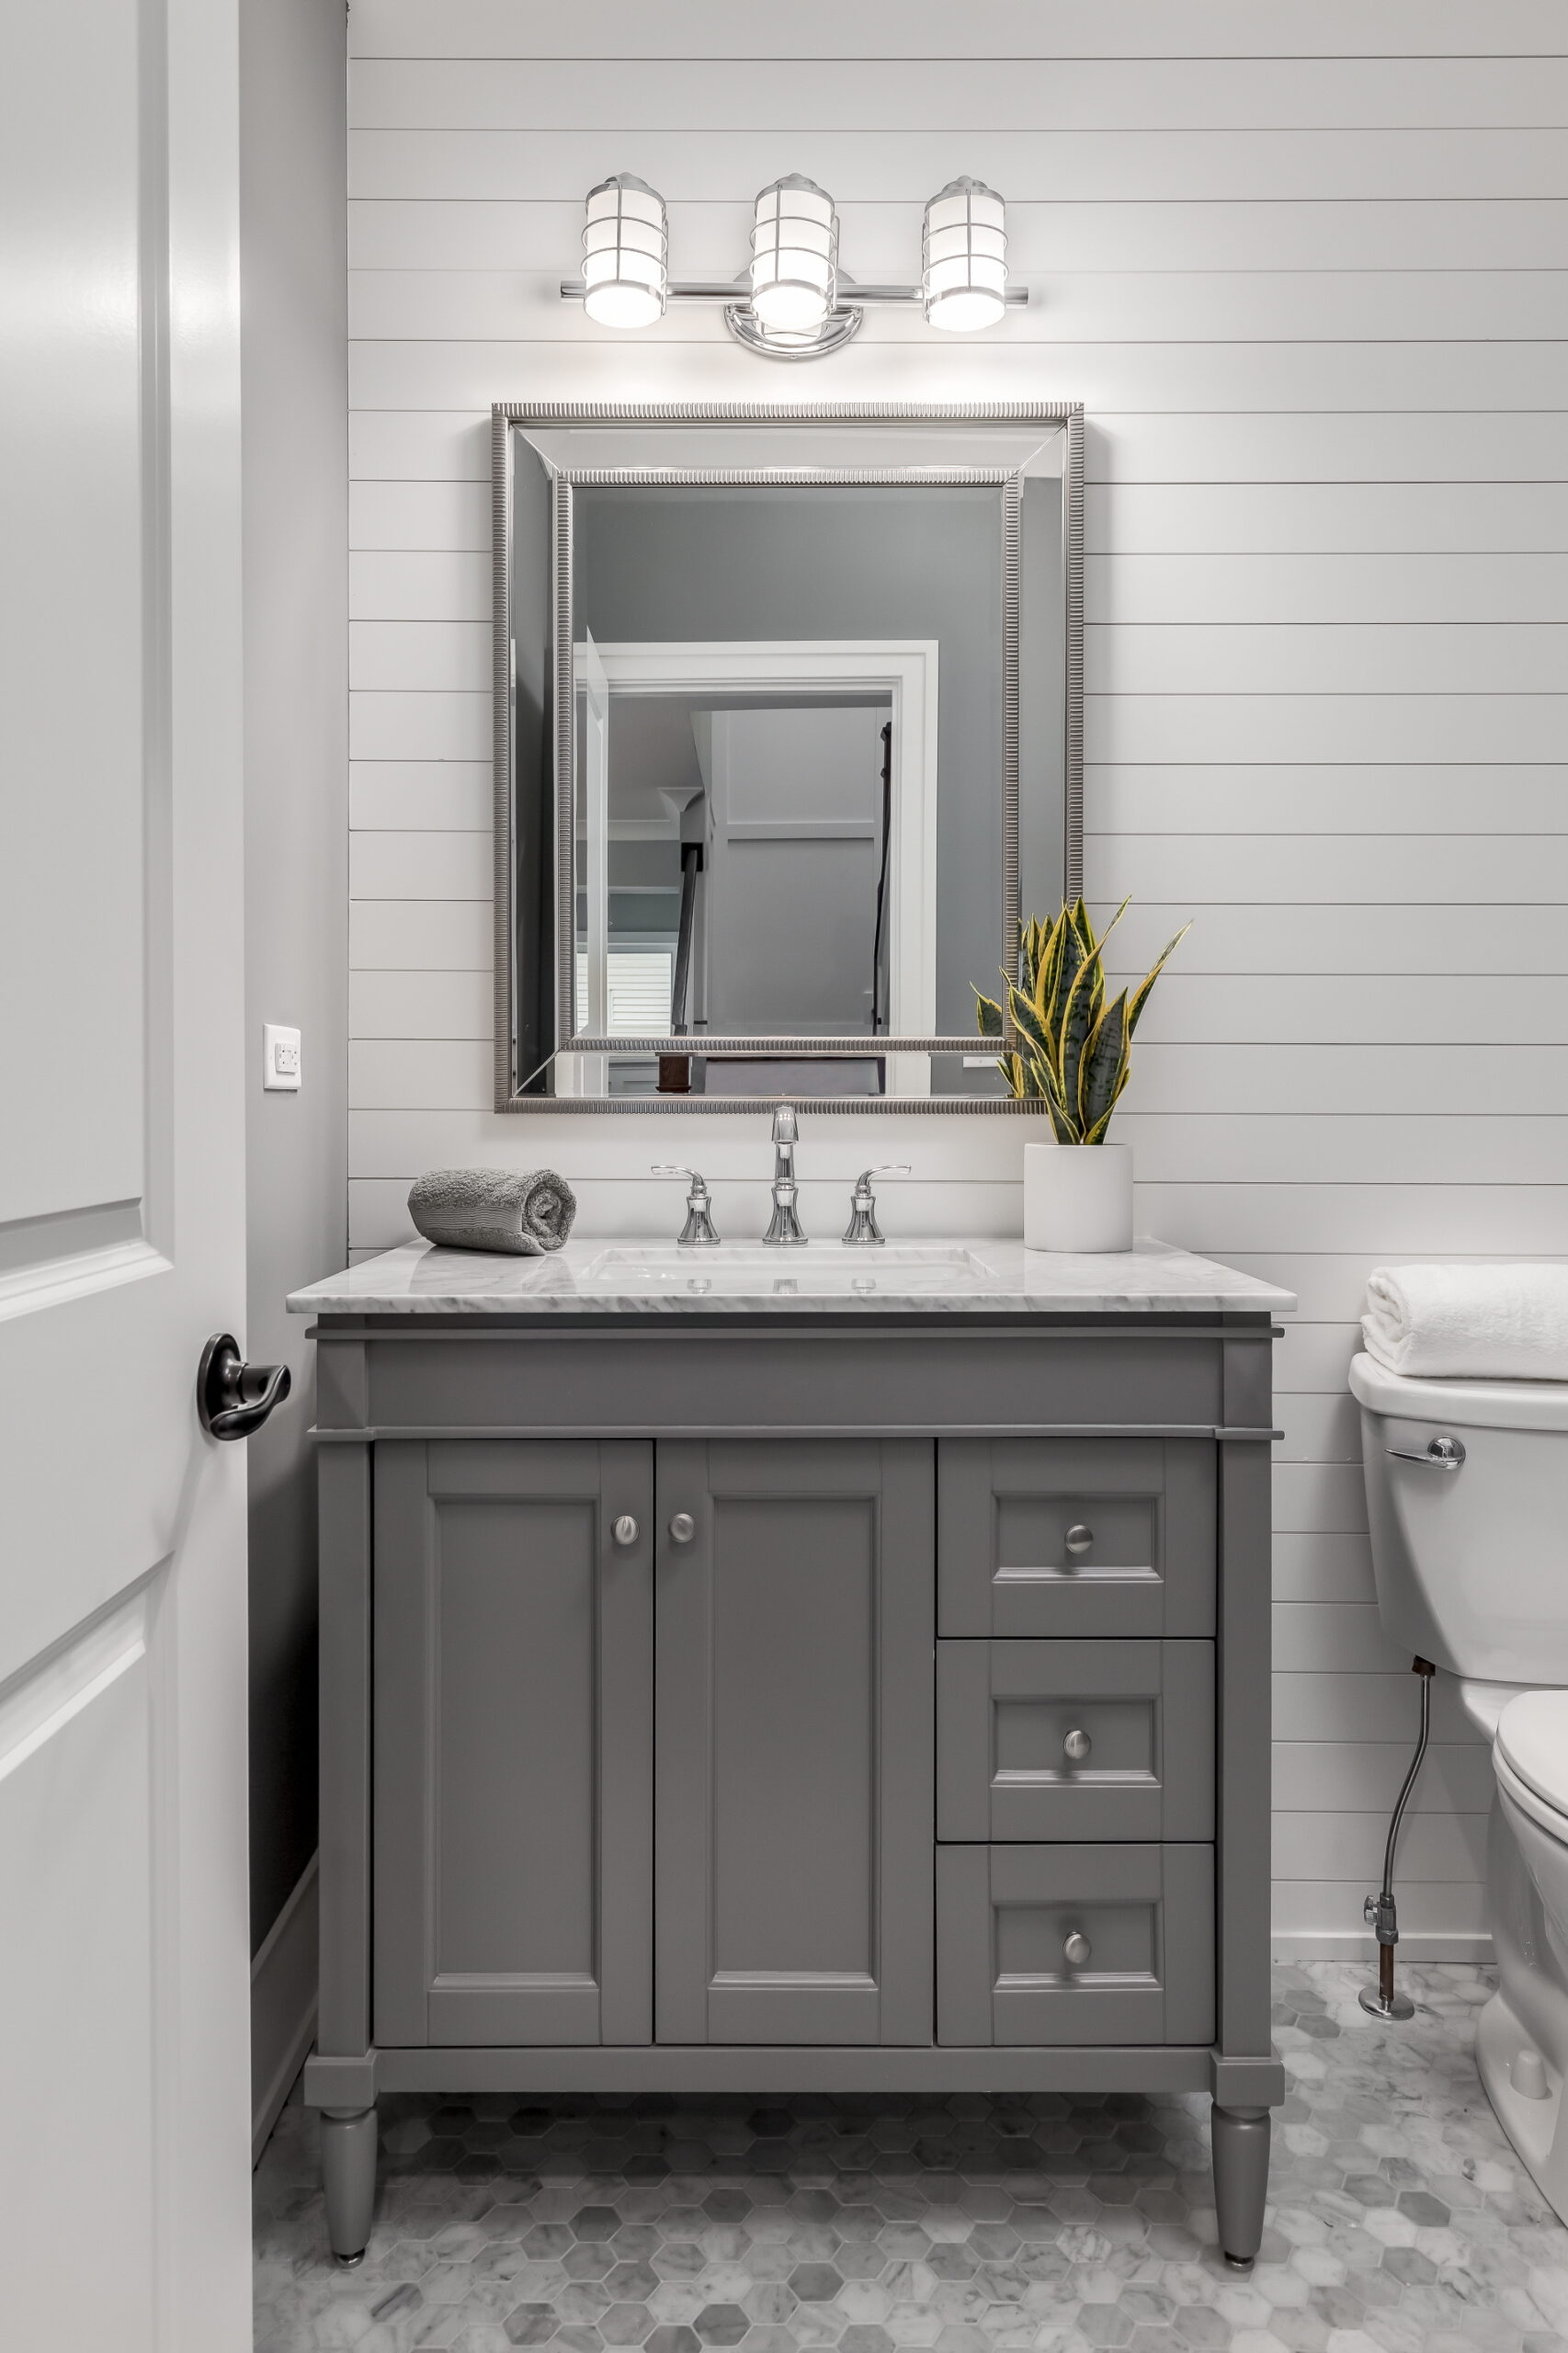 Opt for a vanity with a cabinet below for storage of both toiletries on the top and cleaning supplies below.